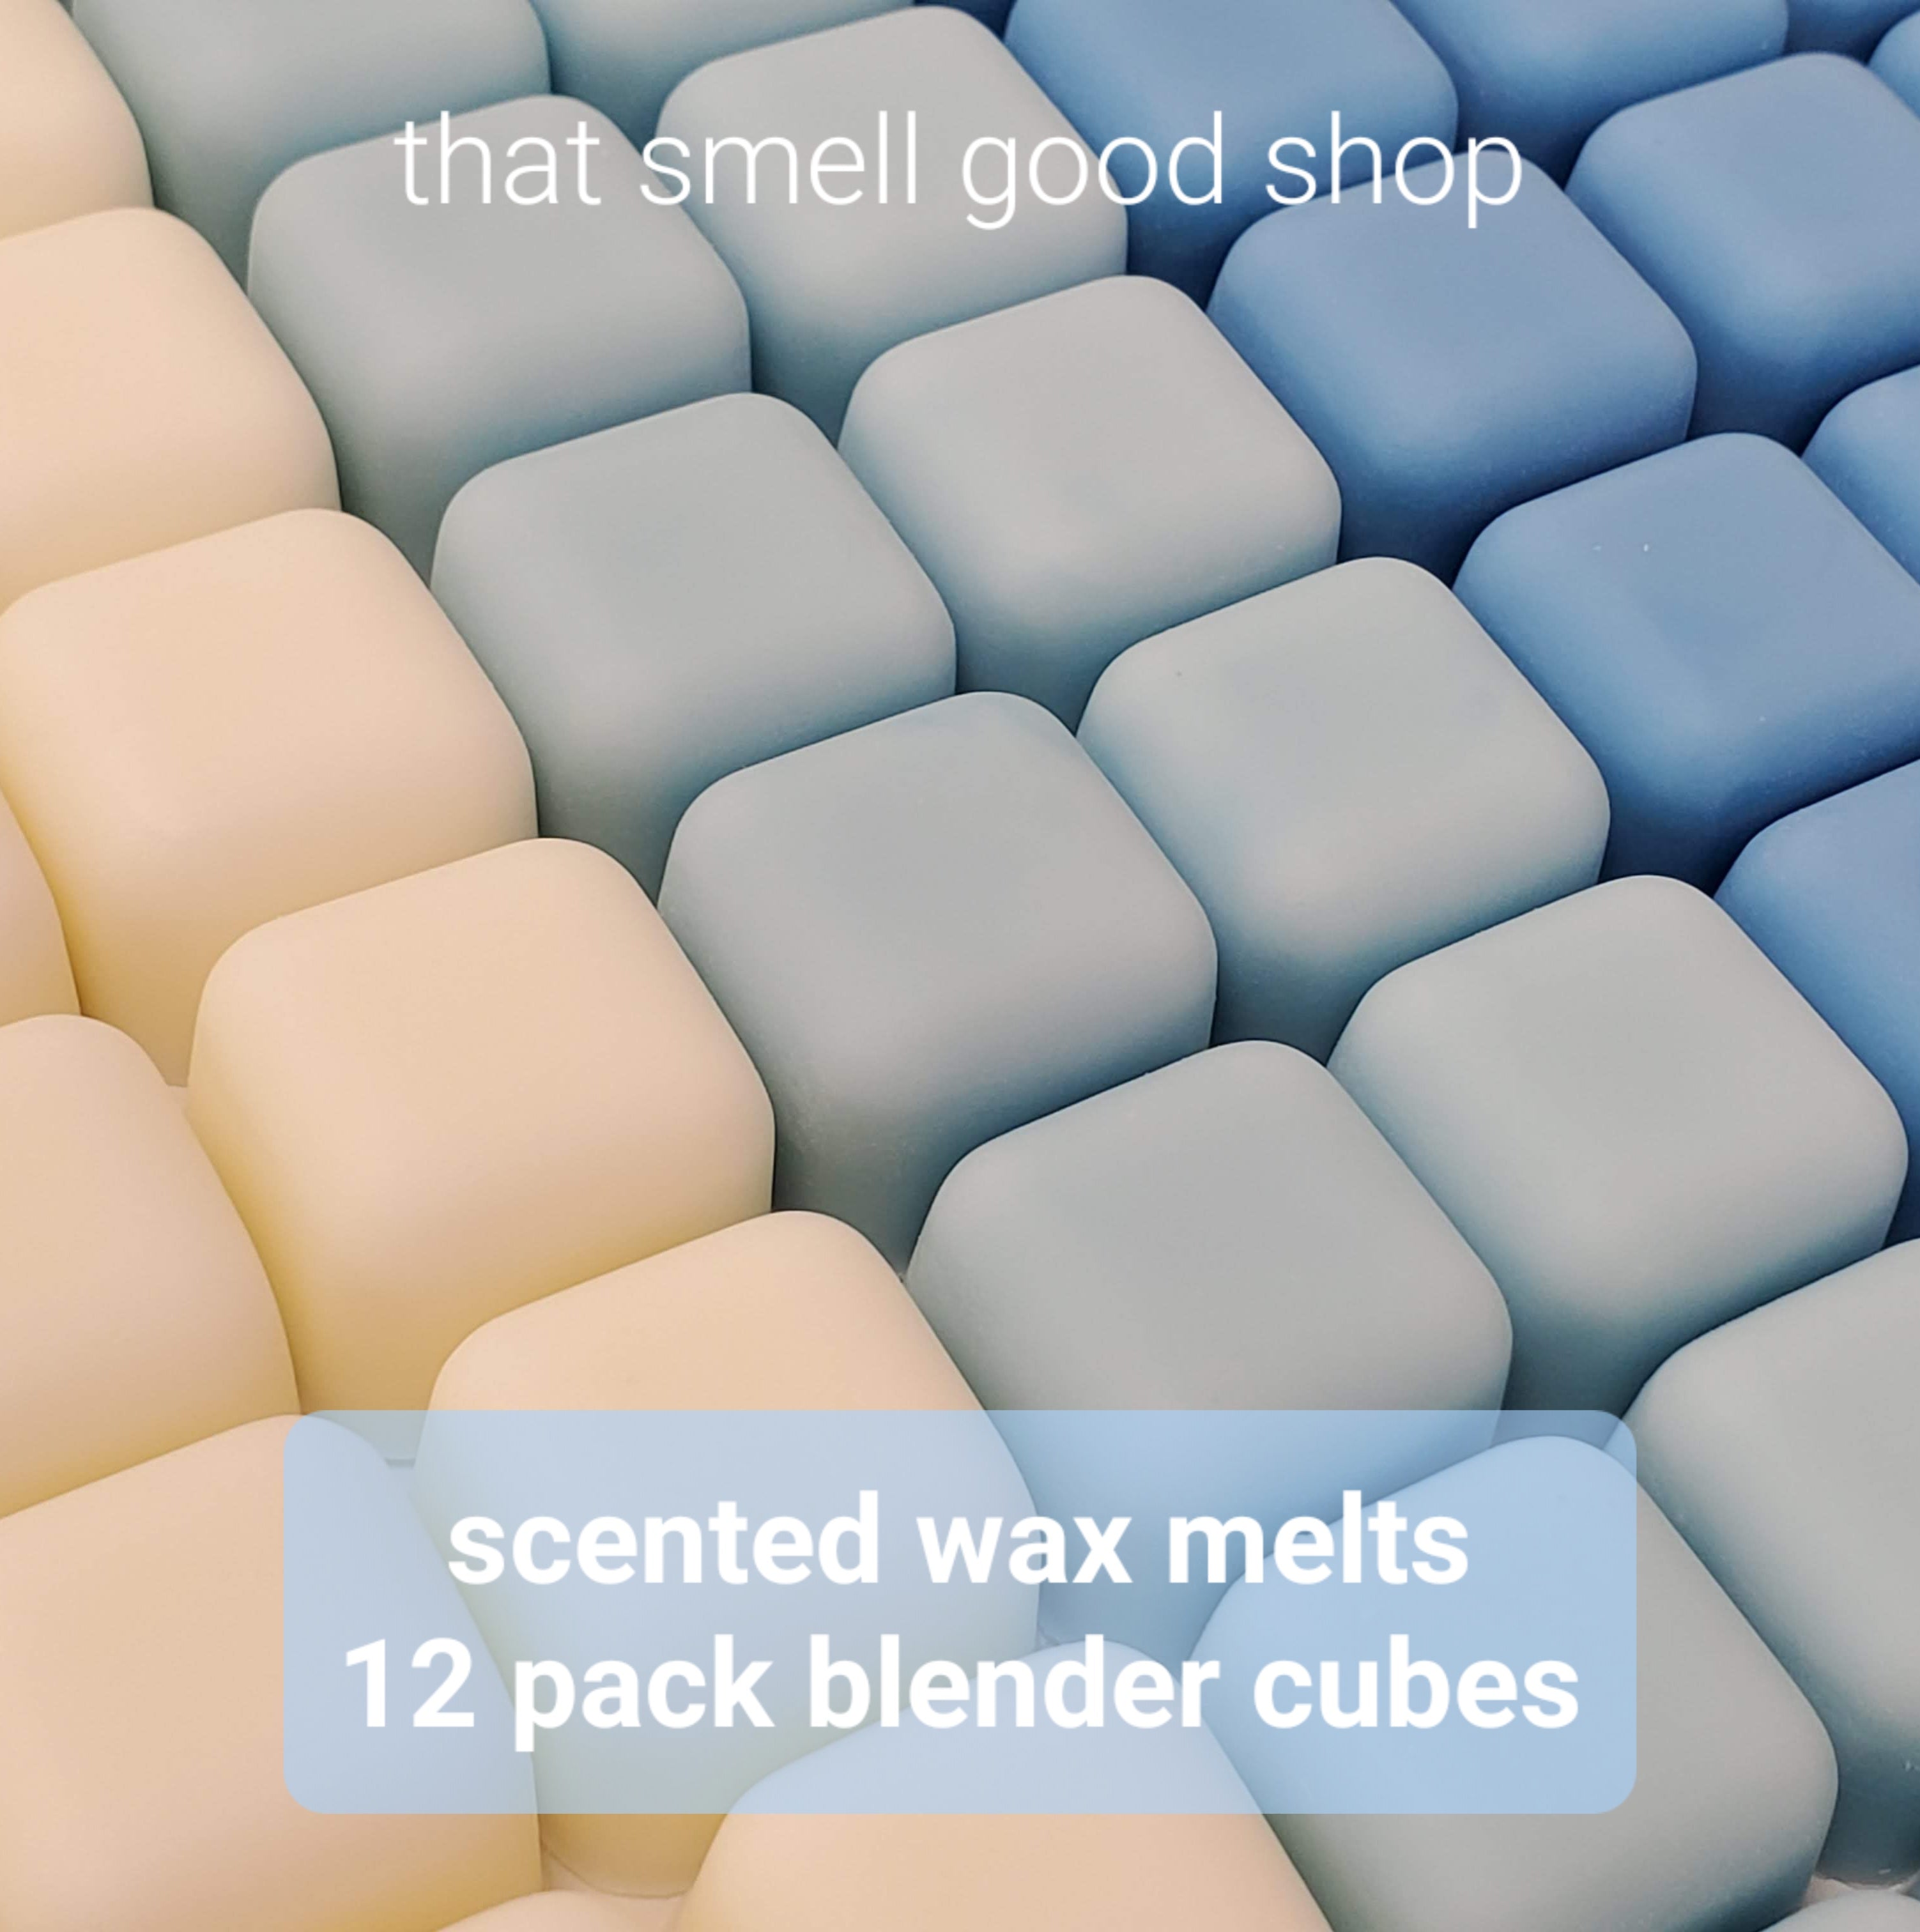 Bear Claws Scented Wax Melt Wax Tart Highly Scented Wax Melts Para